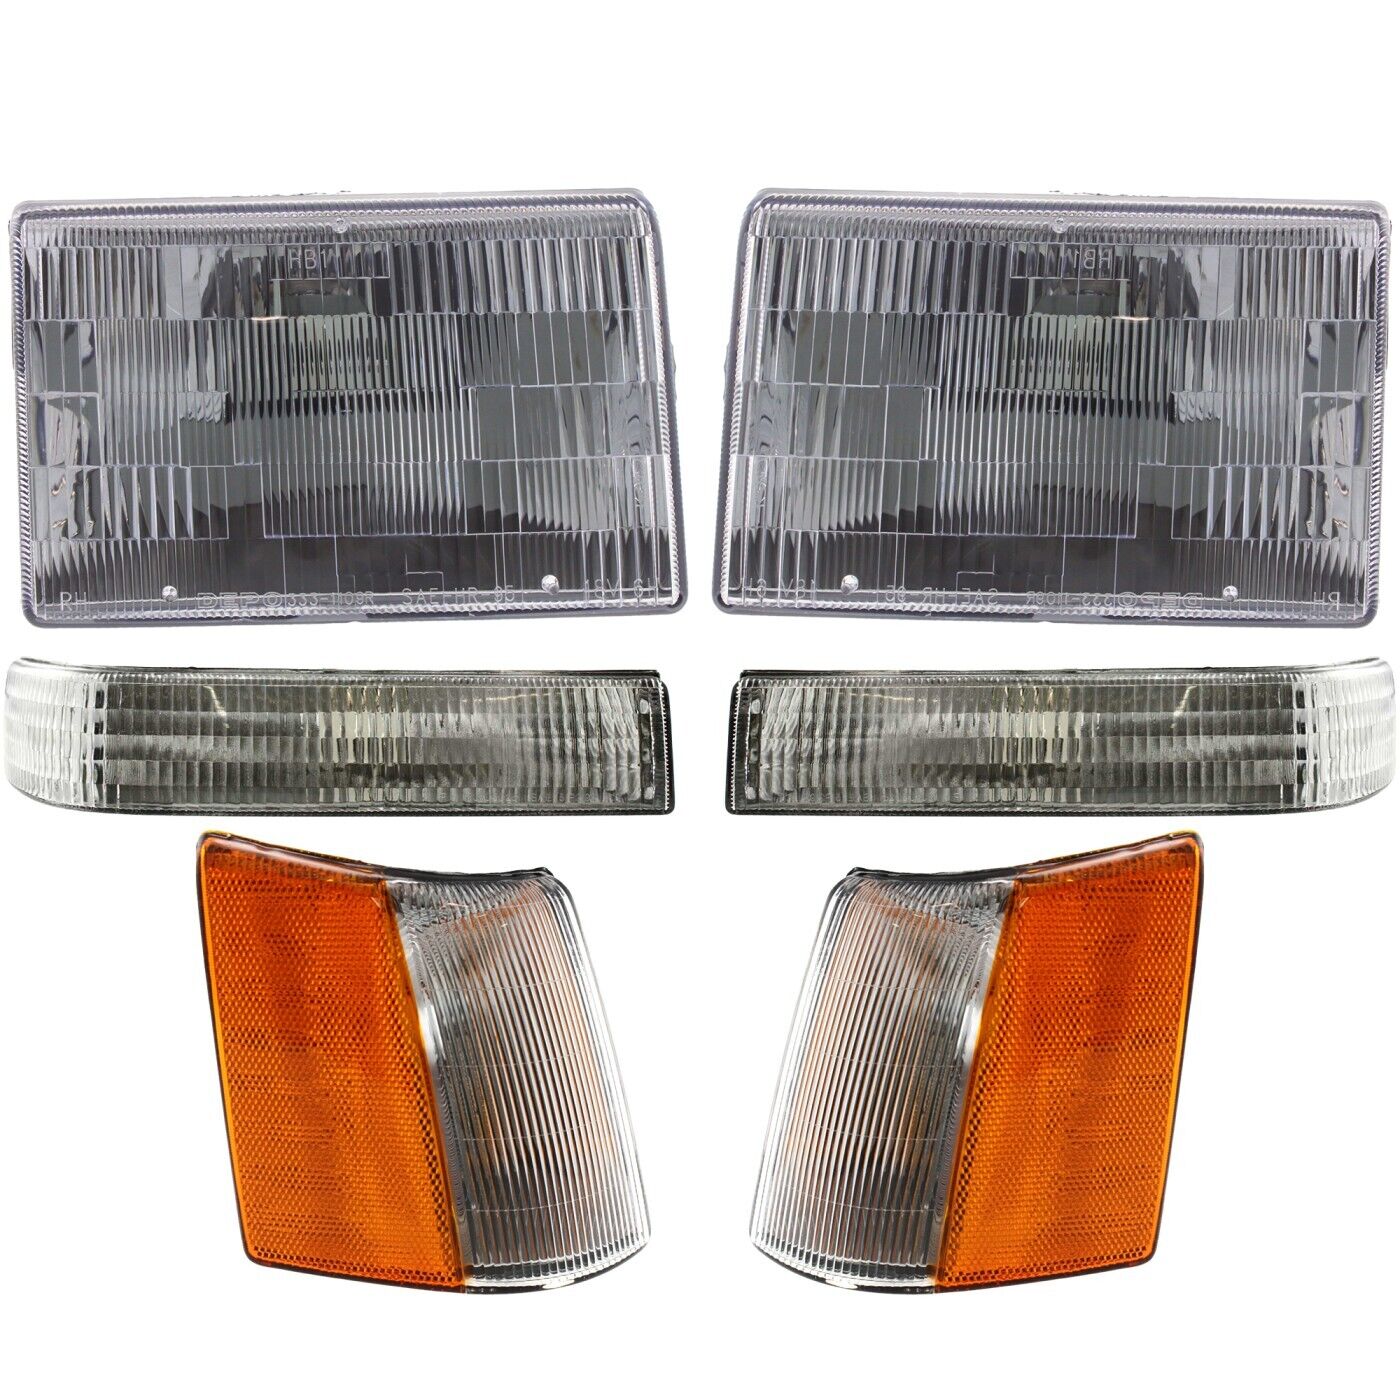 Headlight Kit For 1993-96 Jeep Grand Cherokee Left and Right Canada or USA Built